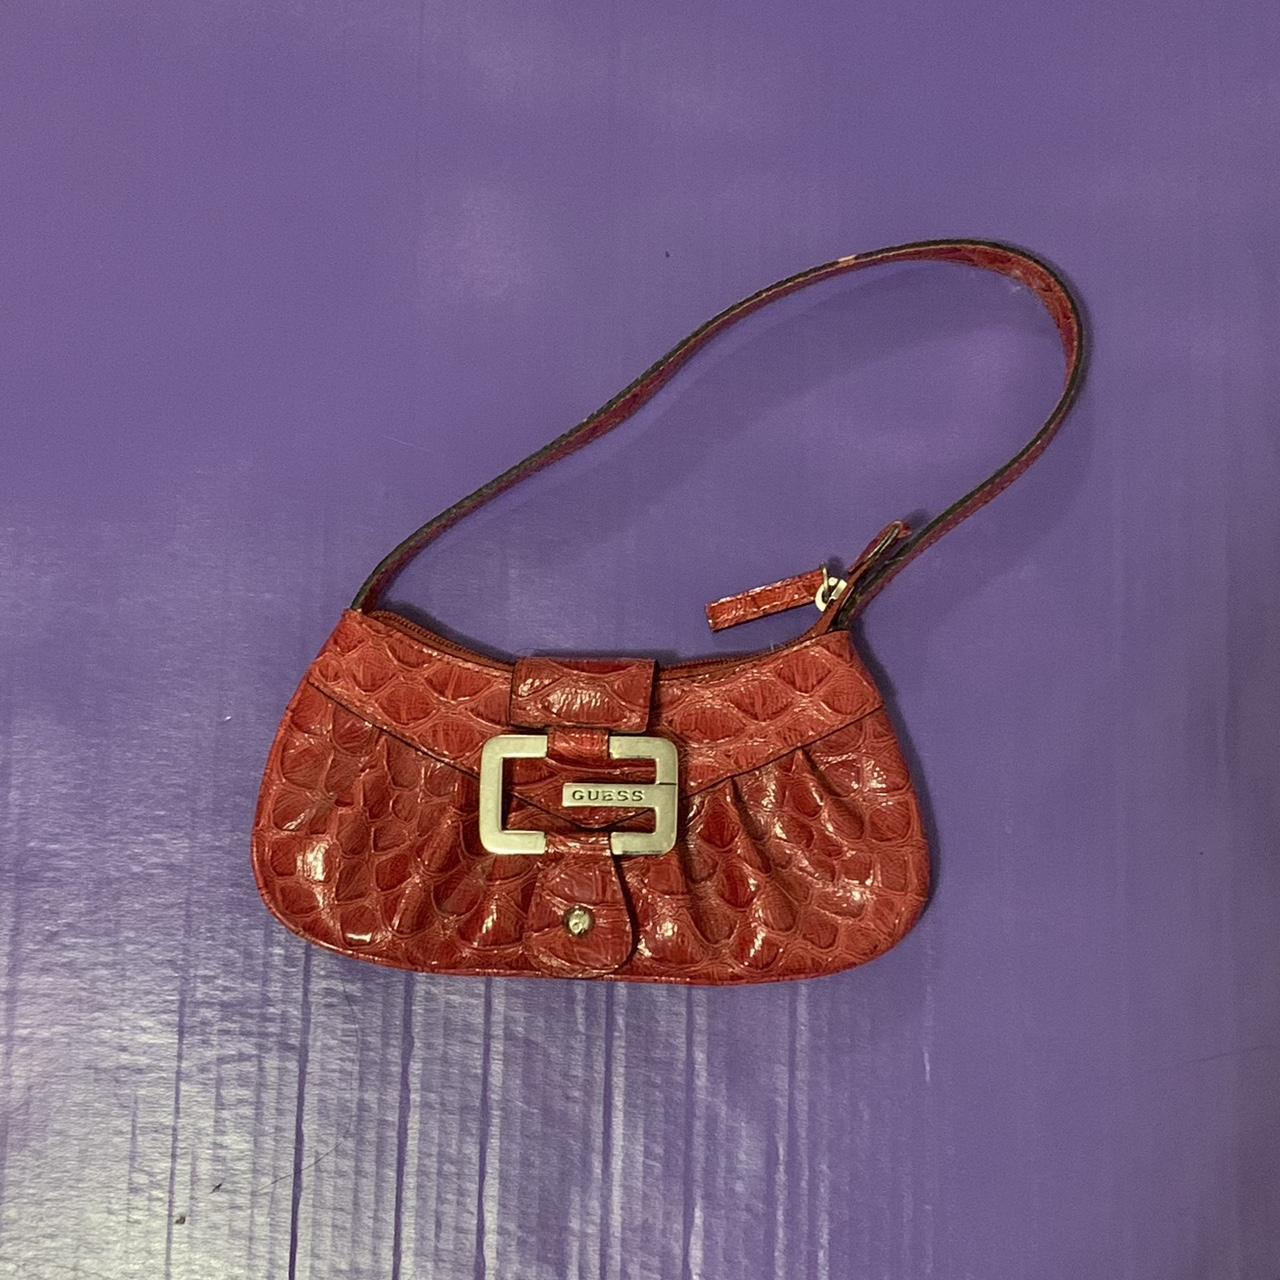 THE ICONIC GUESS VINTAGE BAGS ARE BACK - Numéro Netherlands